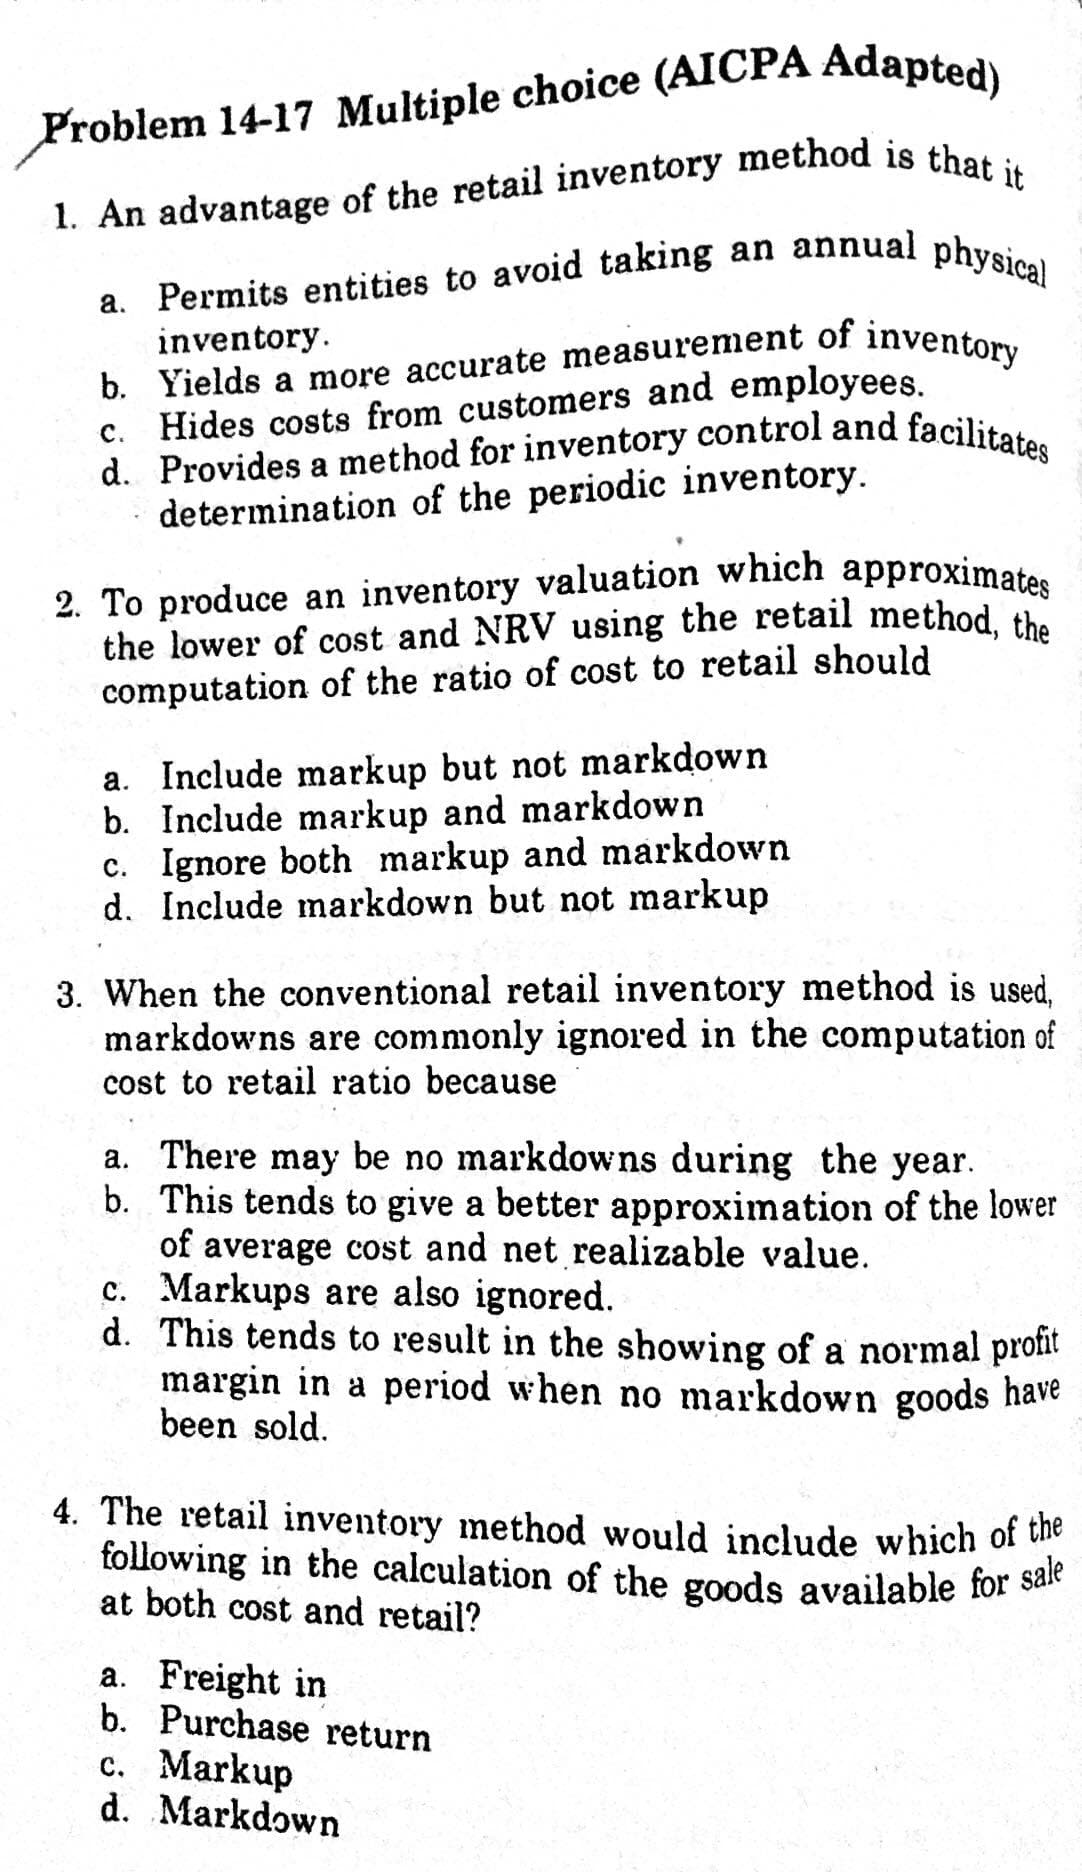 following in the calculation of the goods available for sale
2. To produce an inventory valuation which approximates
d. Provides a method for inventory control and facilitates
a. Permits entities to avoid taking an annual physical
1. An advantage of the retail inventory method is thet
inventory.
b. Yields a more accurate measurement of inventom.
Hides costs from customers and employees.
с.
a
determination of the periodic inventory.
2. To produce an inventory valuation which approximates
the lower of cost and NRV using the retail method, the
computation of the ratio of cost to retail should
a. Include markup but not markdown
b. Include markup and markdown
c. Ignore both markup and markdown
d. Include markdown but not markup
3. When the conventional retail inventory method is used,
markdowns are commonly ignored in the computation of
cost to retail ratio because
a. There may be no markdowns during the year.
b. This tends to give a better approximation of the lower
of average cost and net realizable value.
c. Markups are also ignored.
d. This tends to result in the showing of a normal protit
margin in a period when no markdown goods have
been sold.
4. The retail inventory method would include which of u
following in the calculation of the goods available for sae
at both cost and retail?
a. Freight in
b. Purchase return
c. Markup
d. Markdown
